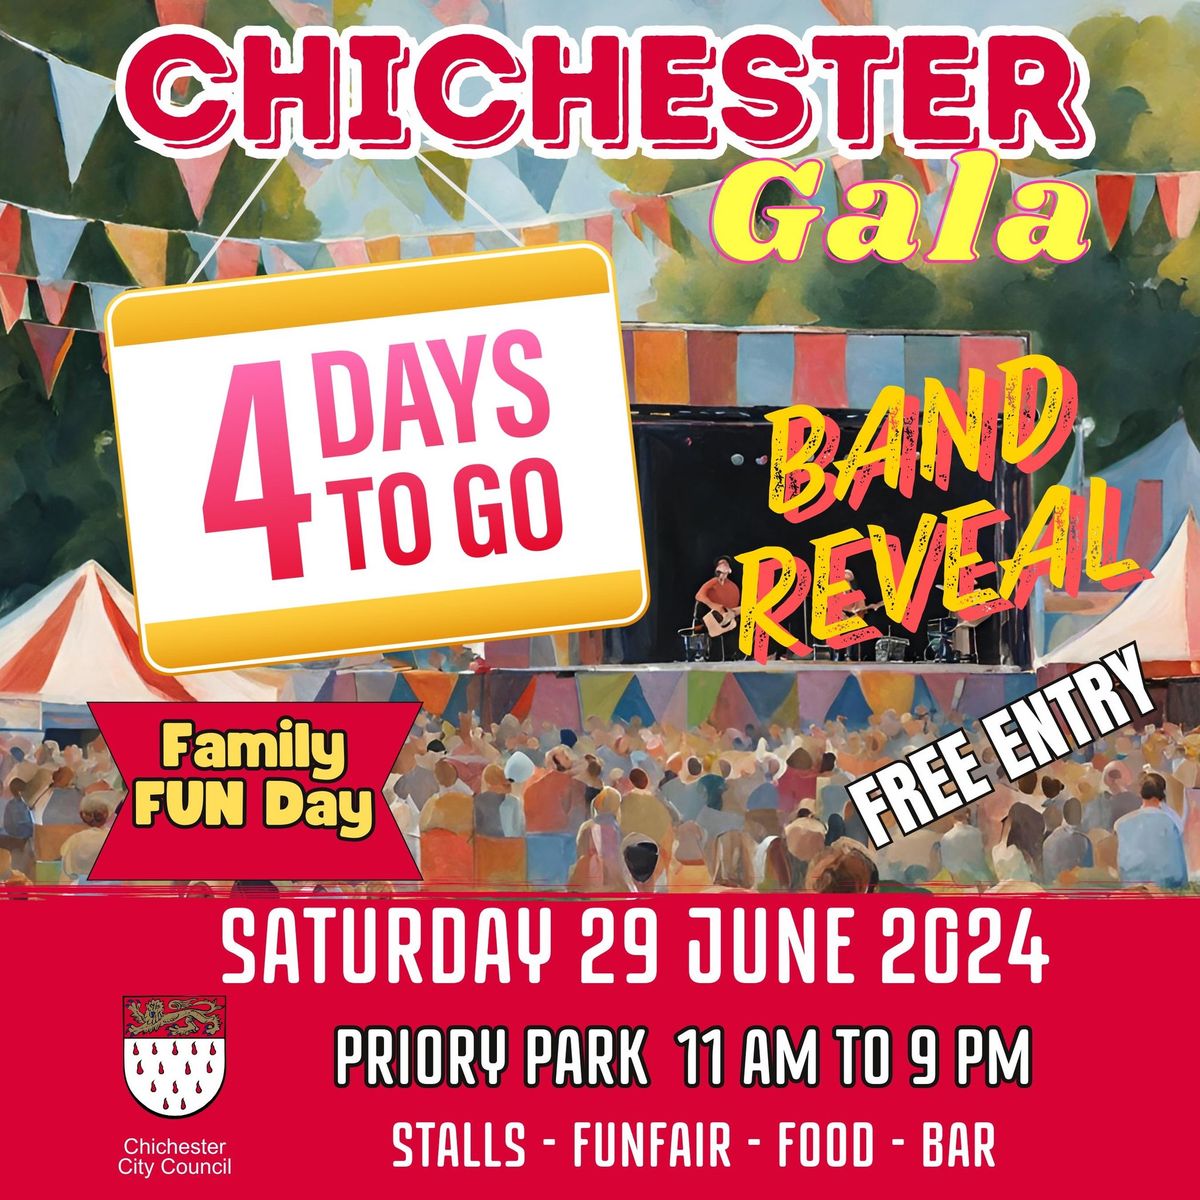 Chichester GALA! FREE at Priory Park - Chichester City Council